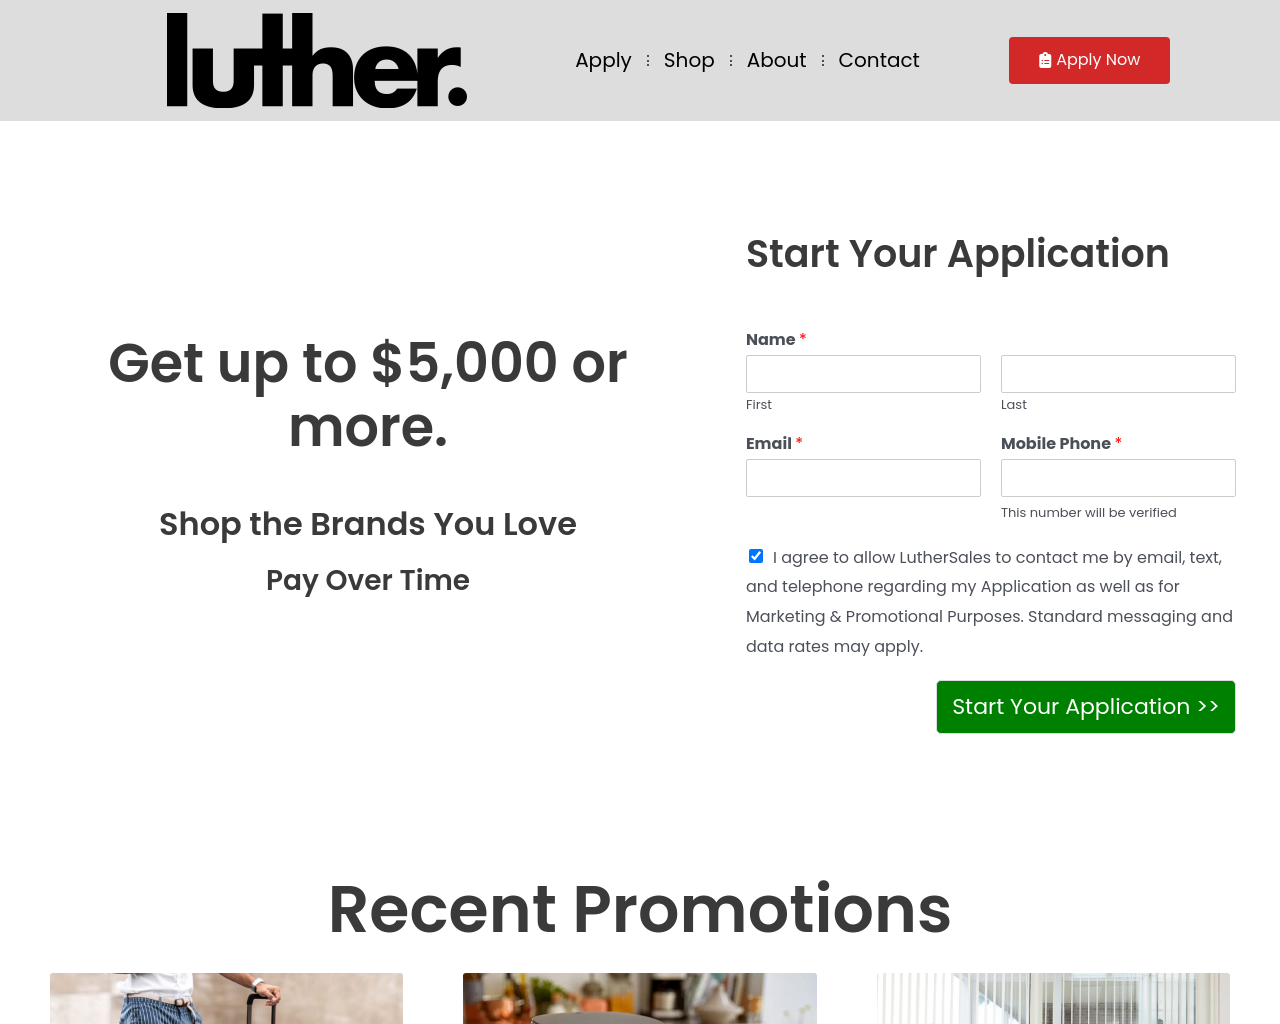 luthersales.com